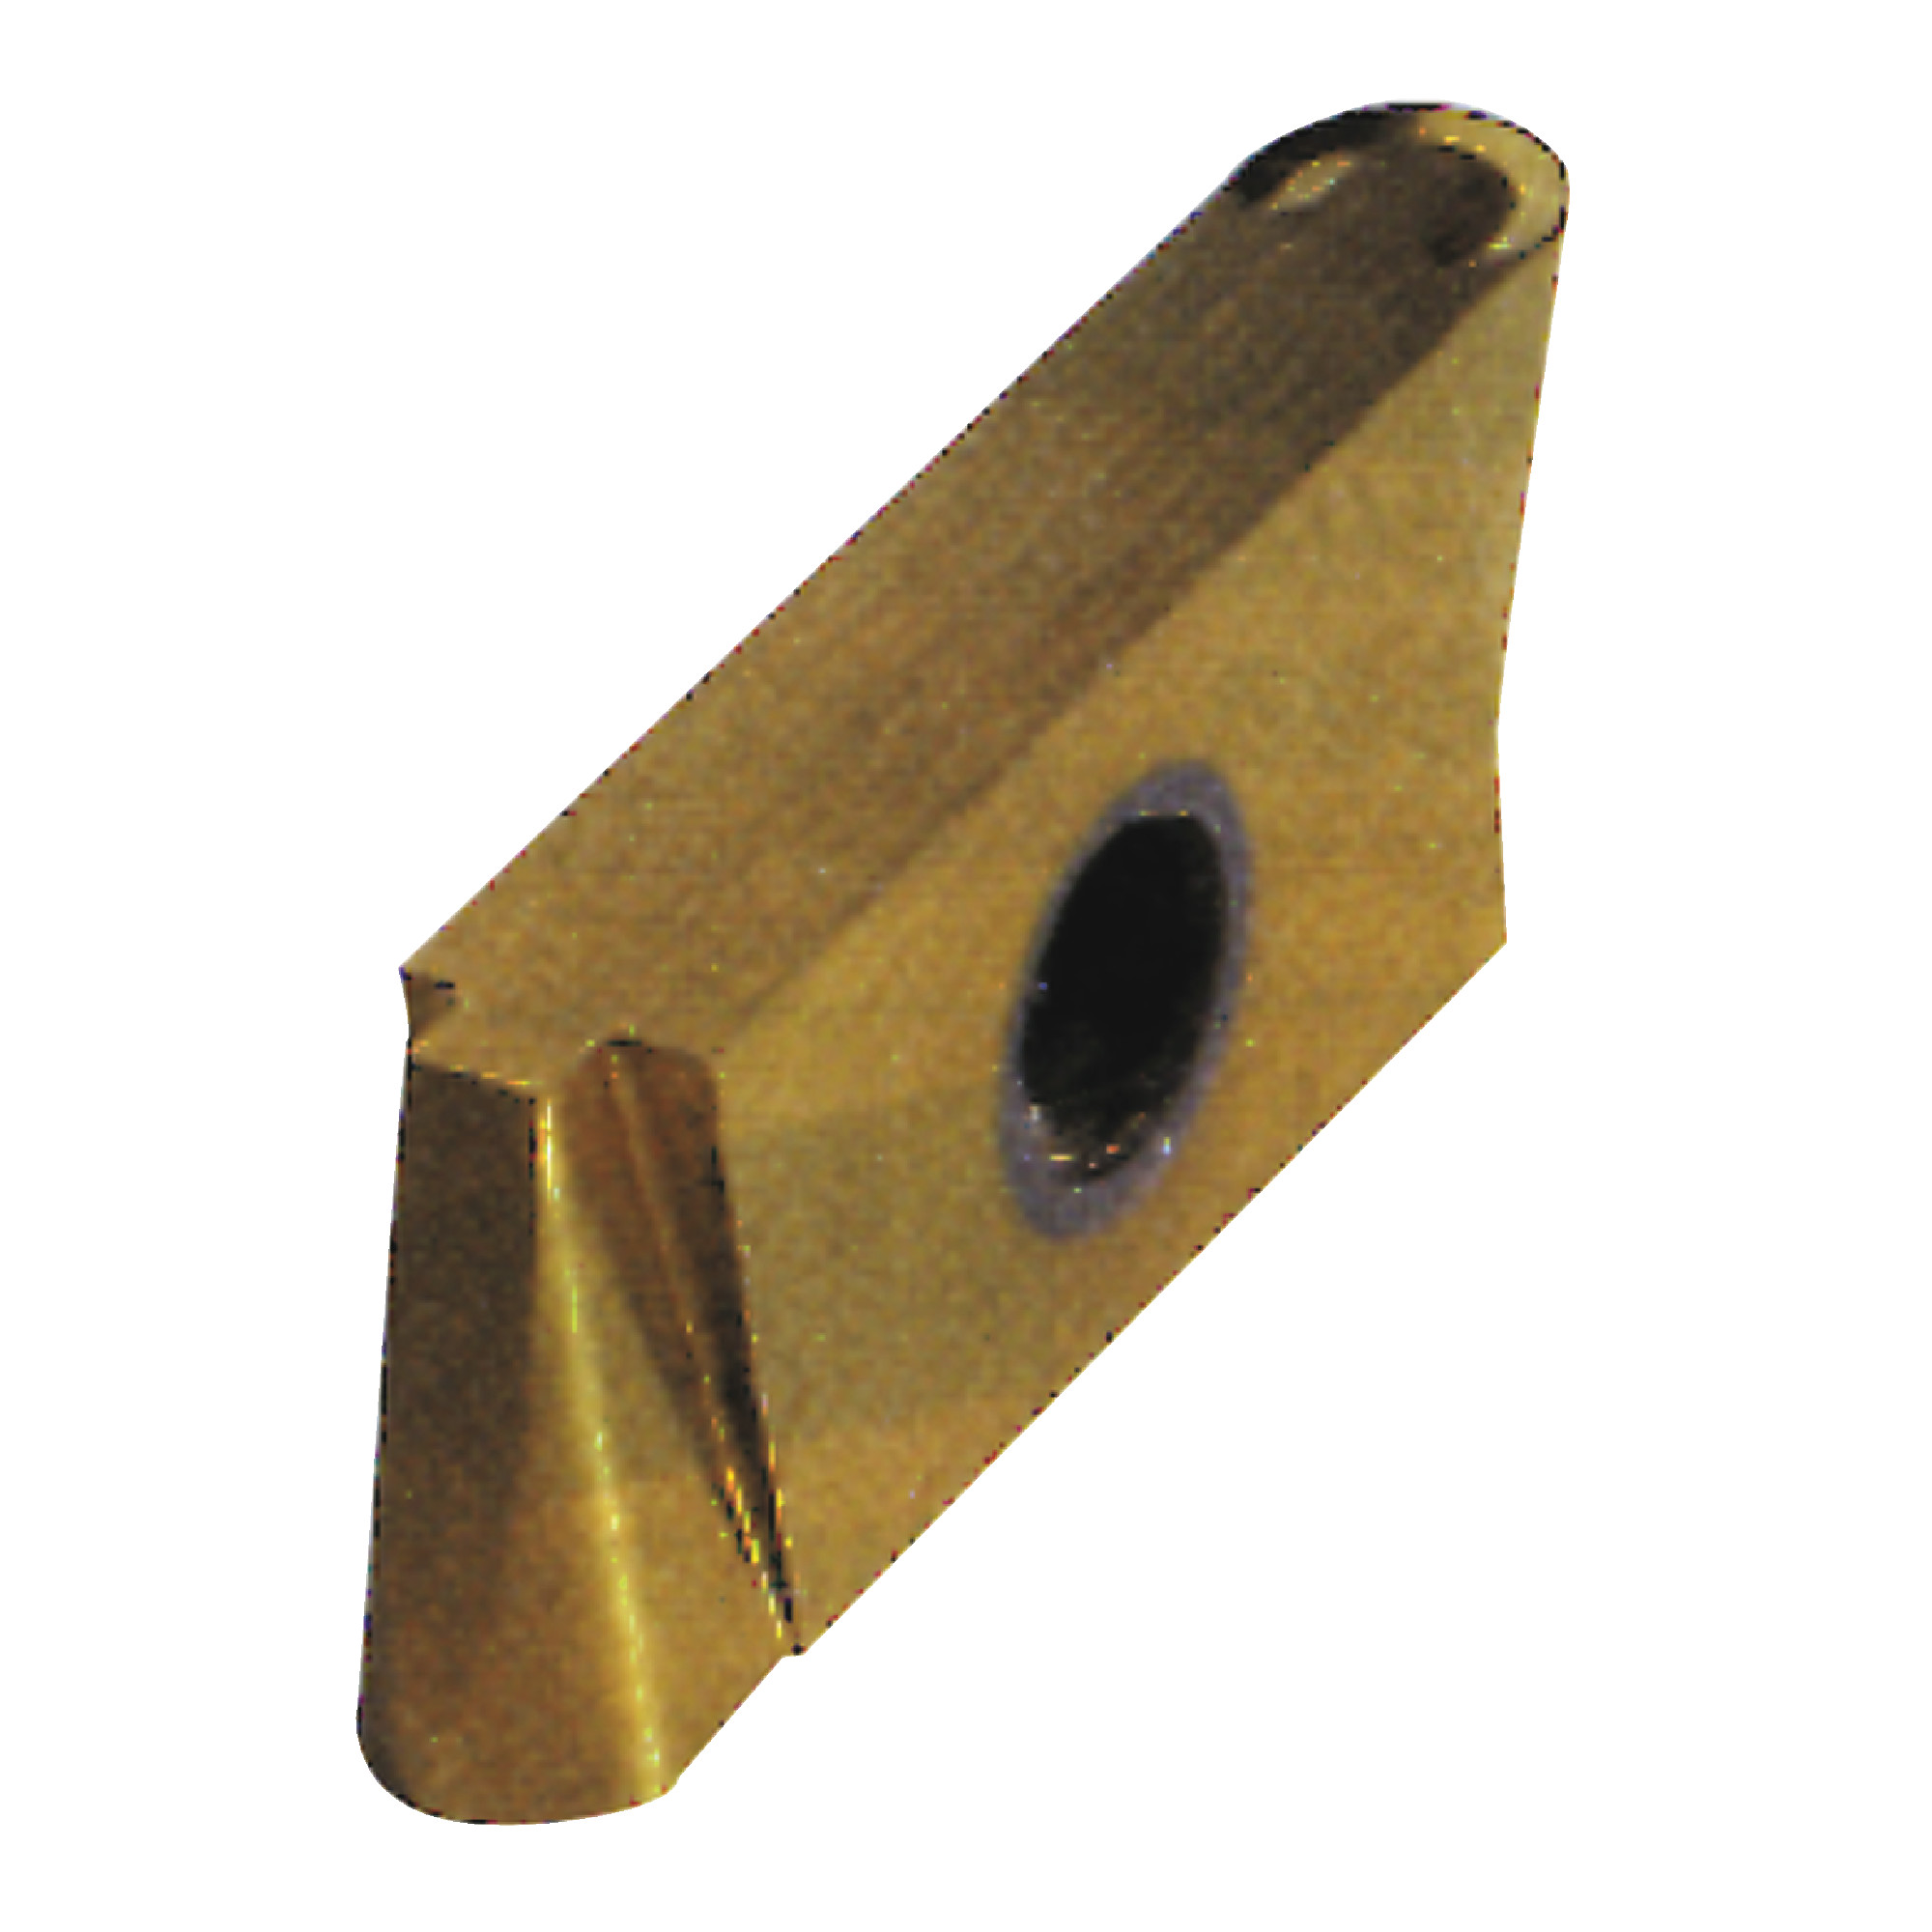 NIKCOLE - GIE-7-SC-3-R C5-PV / Indexable Carbide Insert for Profiling / 0.125" Cutting Width / Right Hand